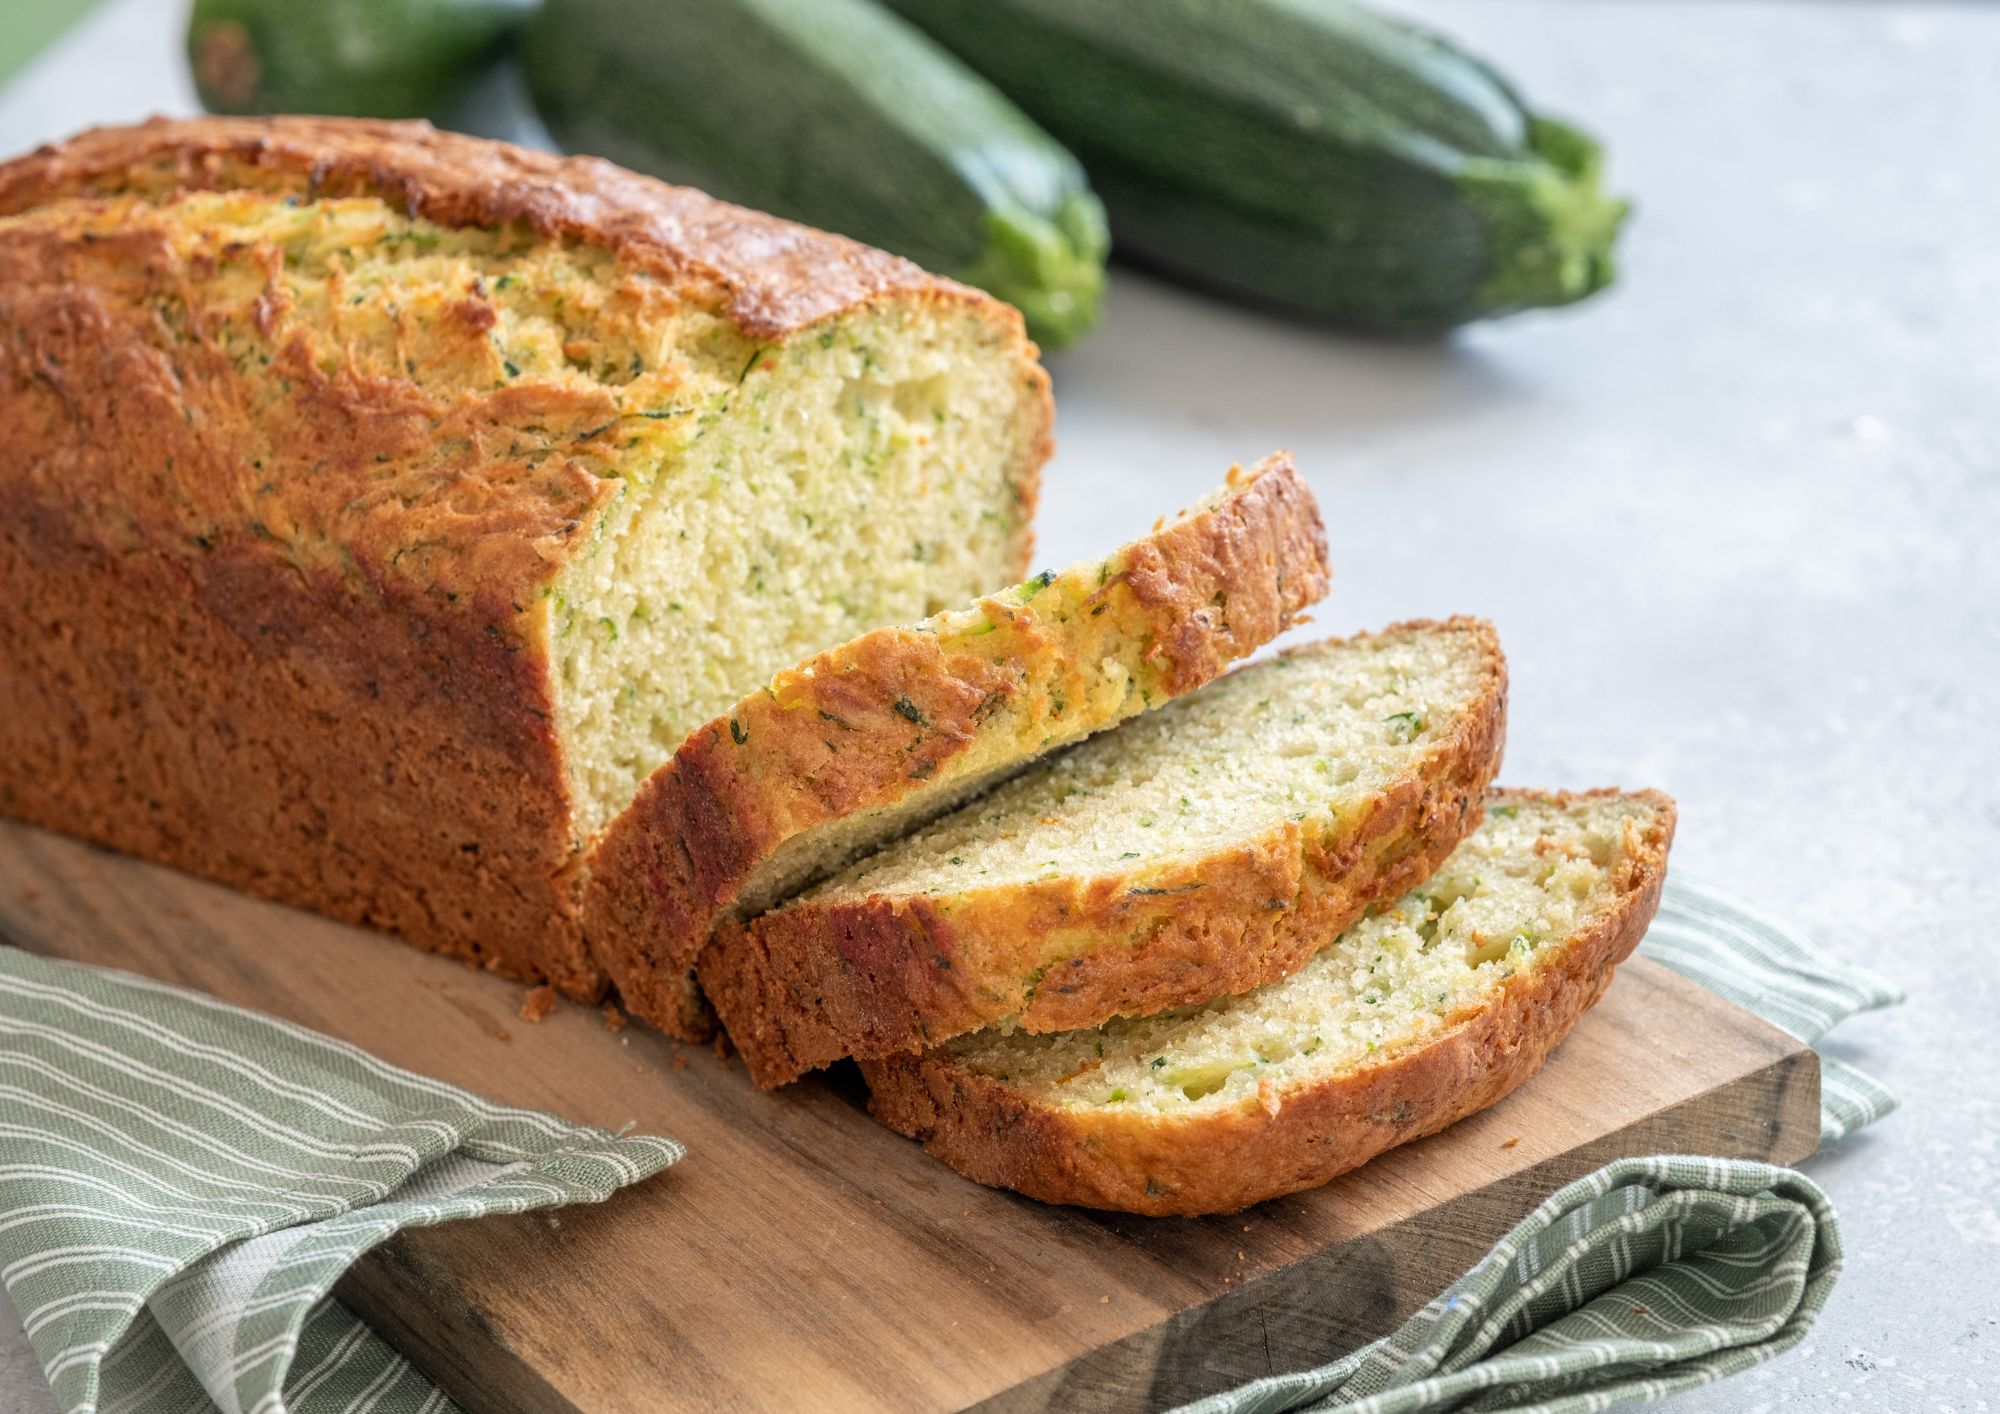 Savoury plum cake with courgettes and potatoes 